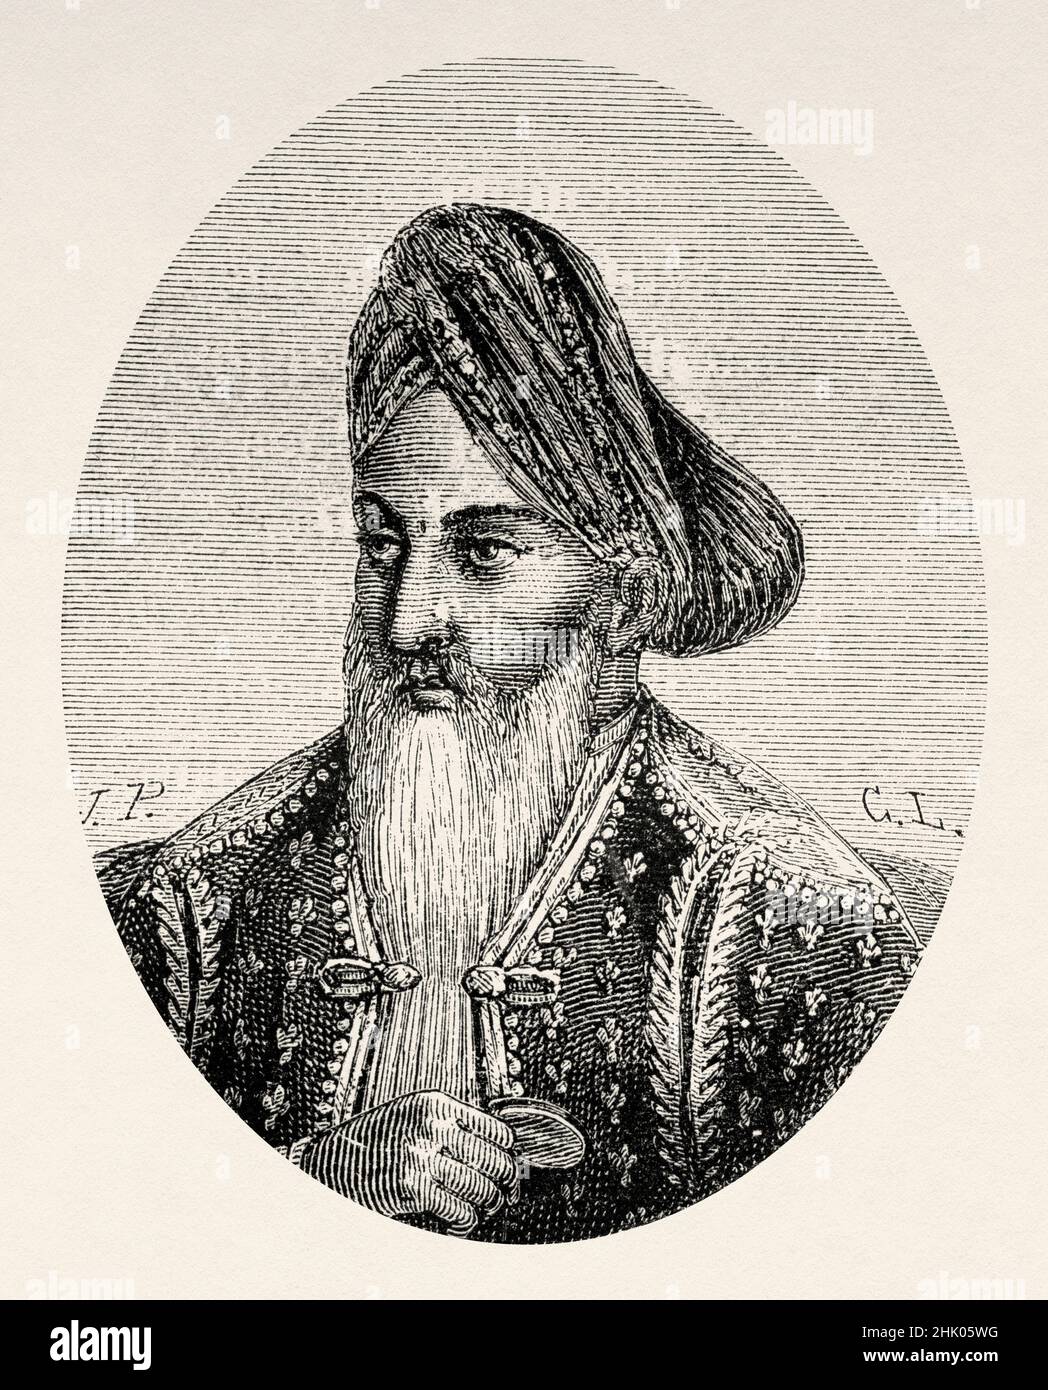 Portrait of Amir-i Kabir. Emir Dost Mohammad Khan Barakzai (1793-1863) was the founder of the Barakzai dynasty and one of the prominent rulers of Afghanistan during the First Anglo-Afghan War, Asia. Old 19th century engraved illustration from Trip to Punjab and Kashmir by Guillaume Lejean, Le Tour du Monde 1870 Stock Photo